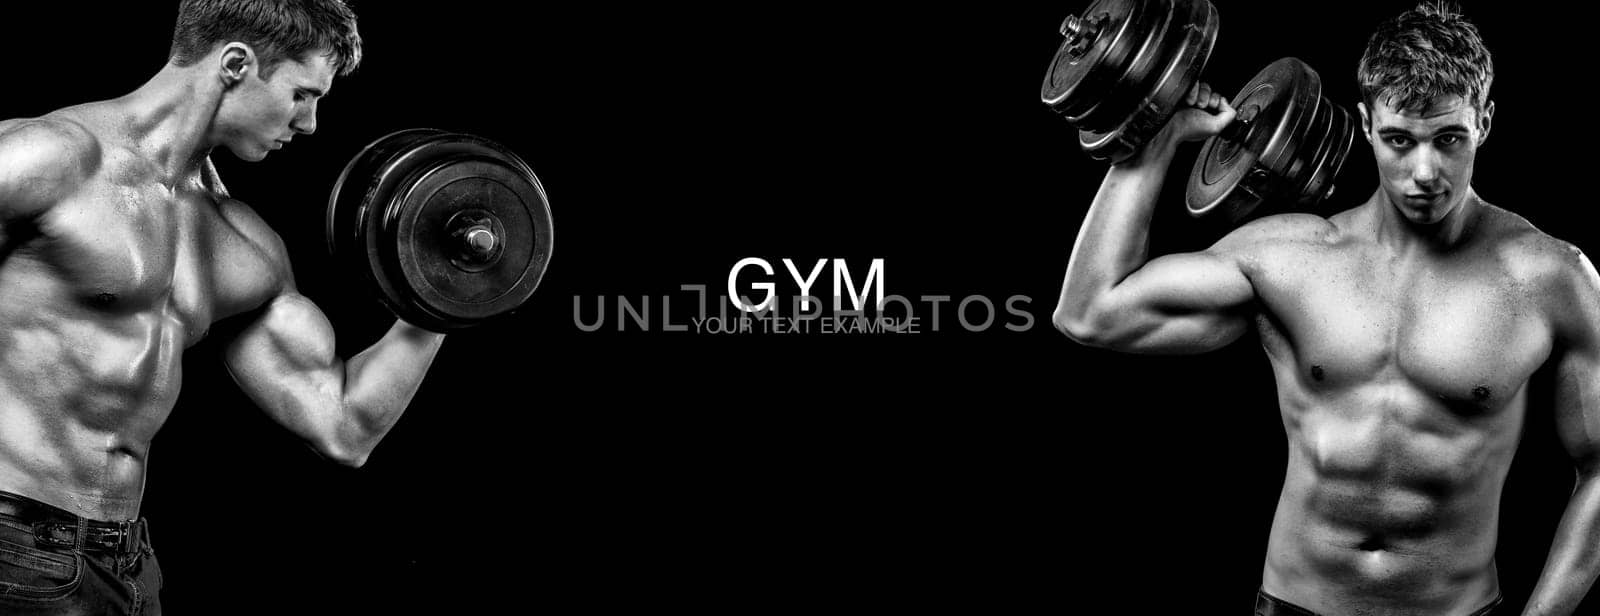 Portrait of a fit and muscular man bodybuilder doing intense core workout with kettlebell in gym.